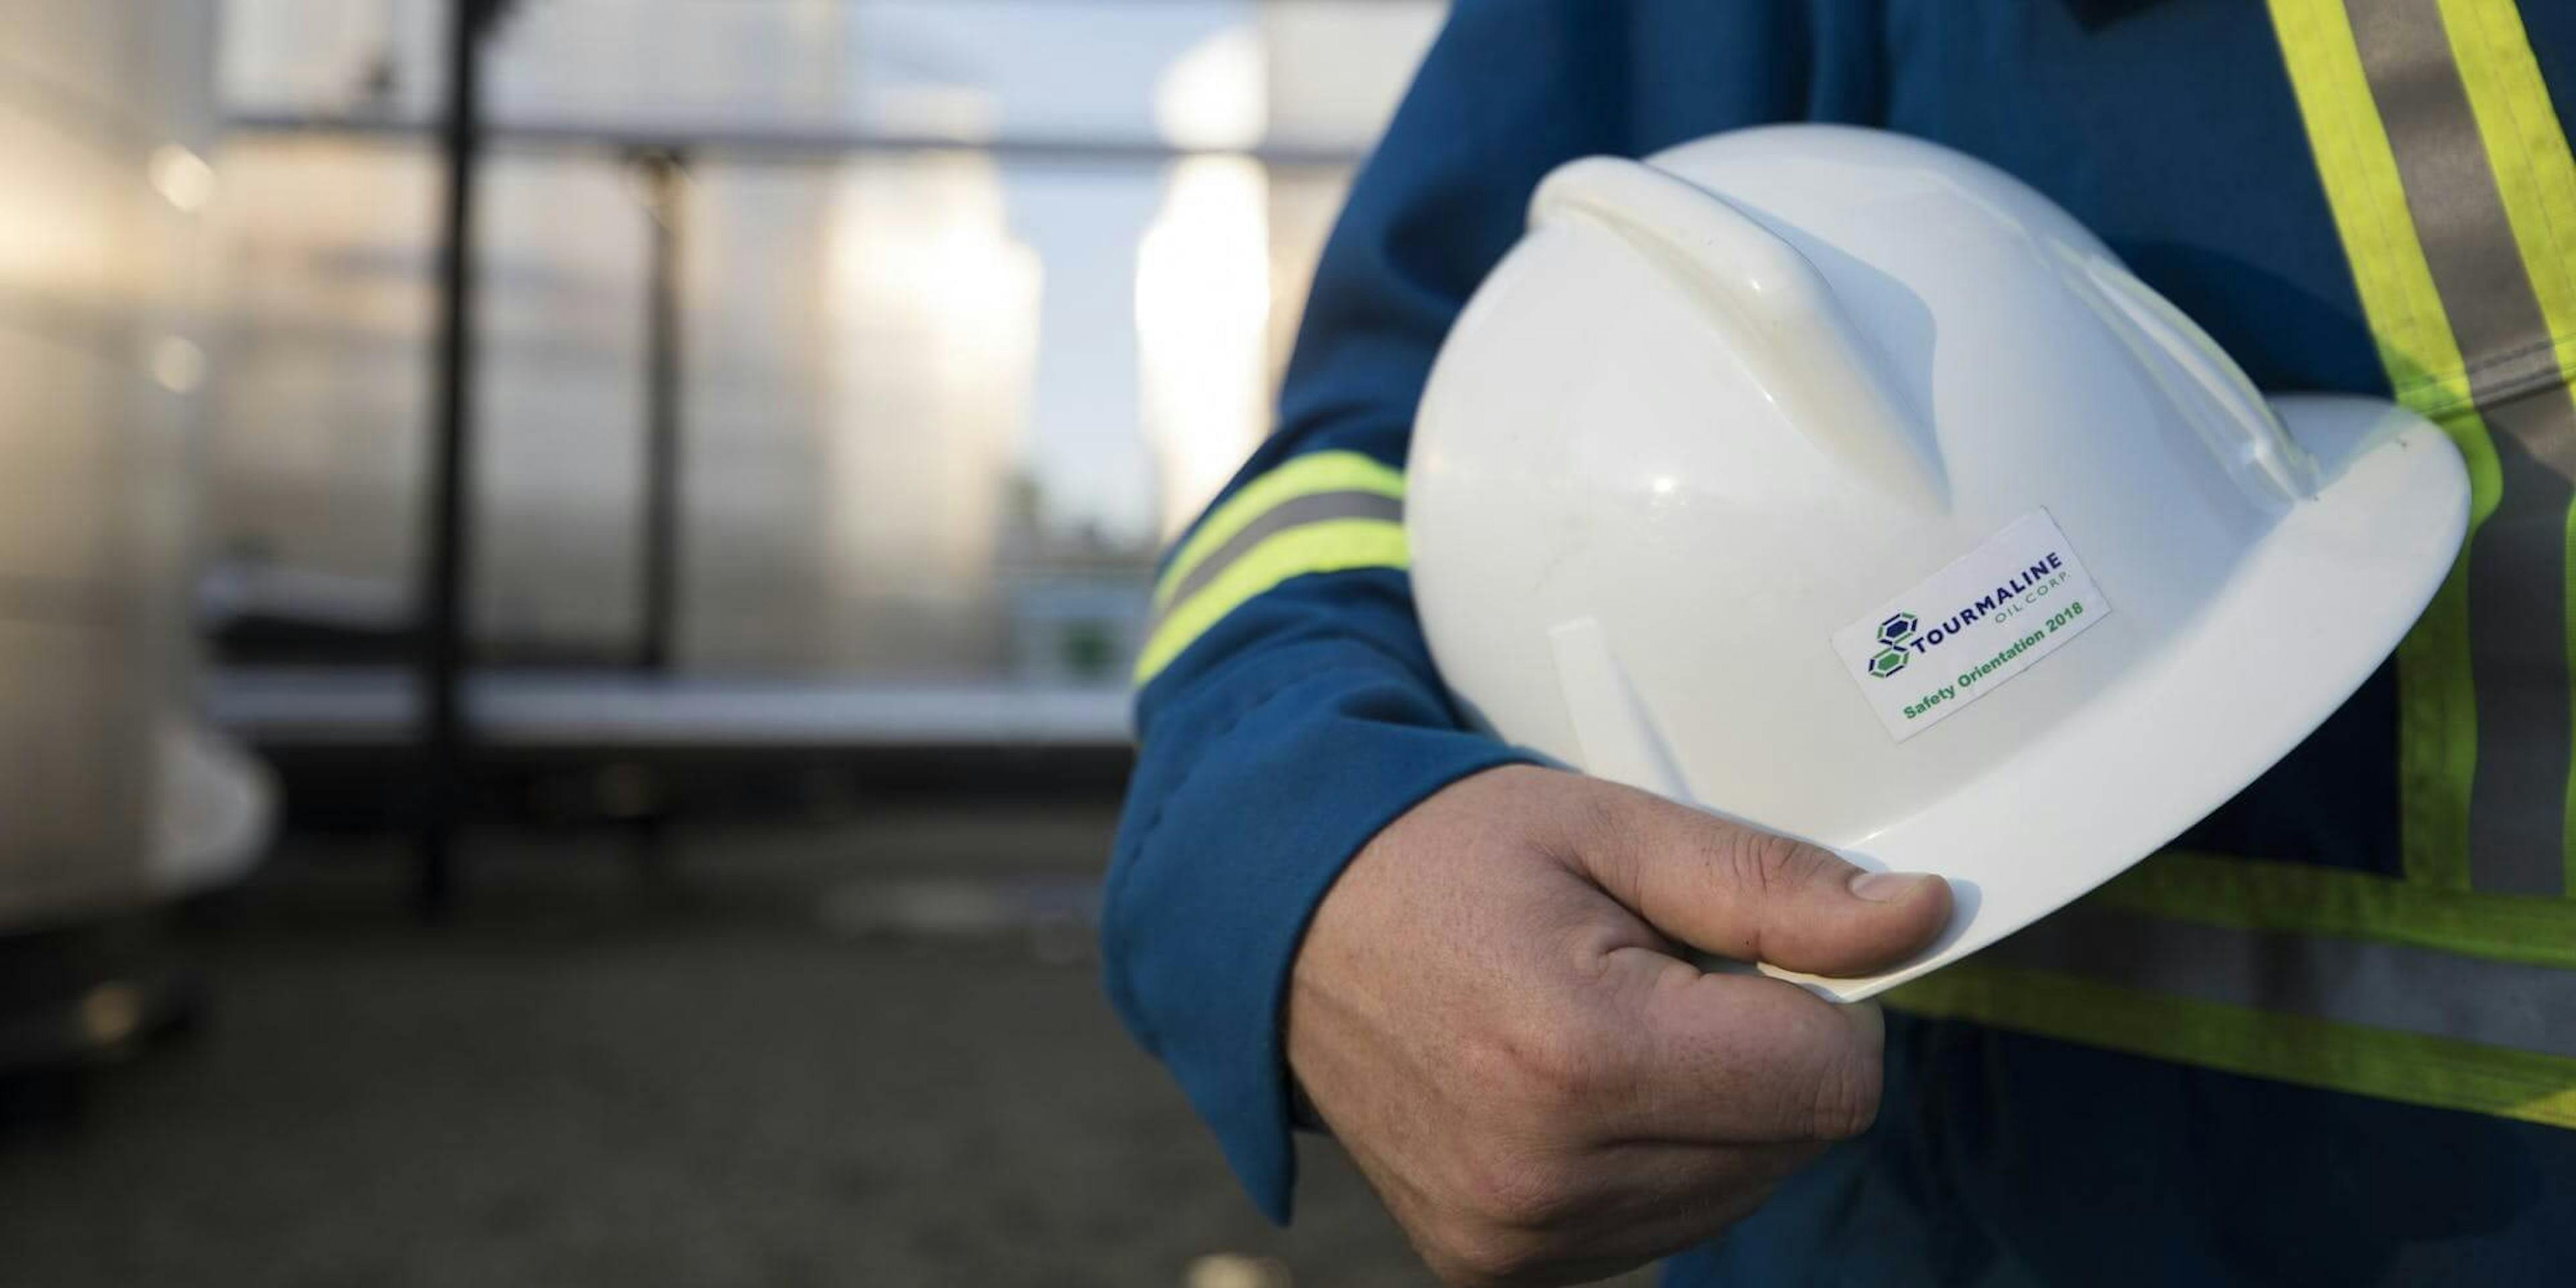 A worker named Peter displays his Tourmaline Oil Corp hard hat.